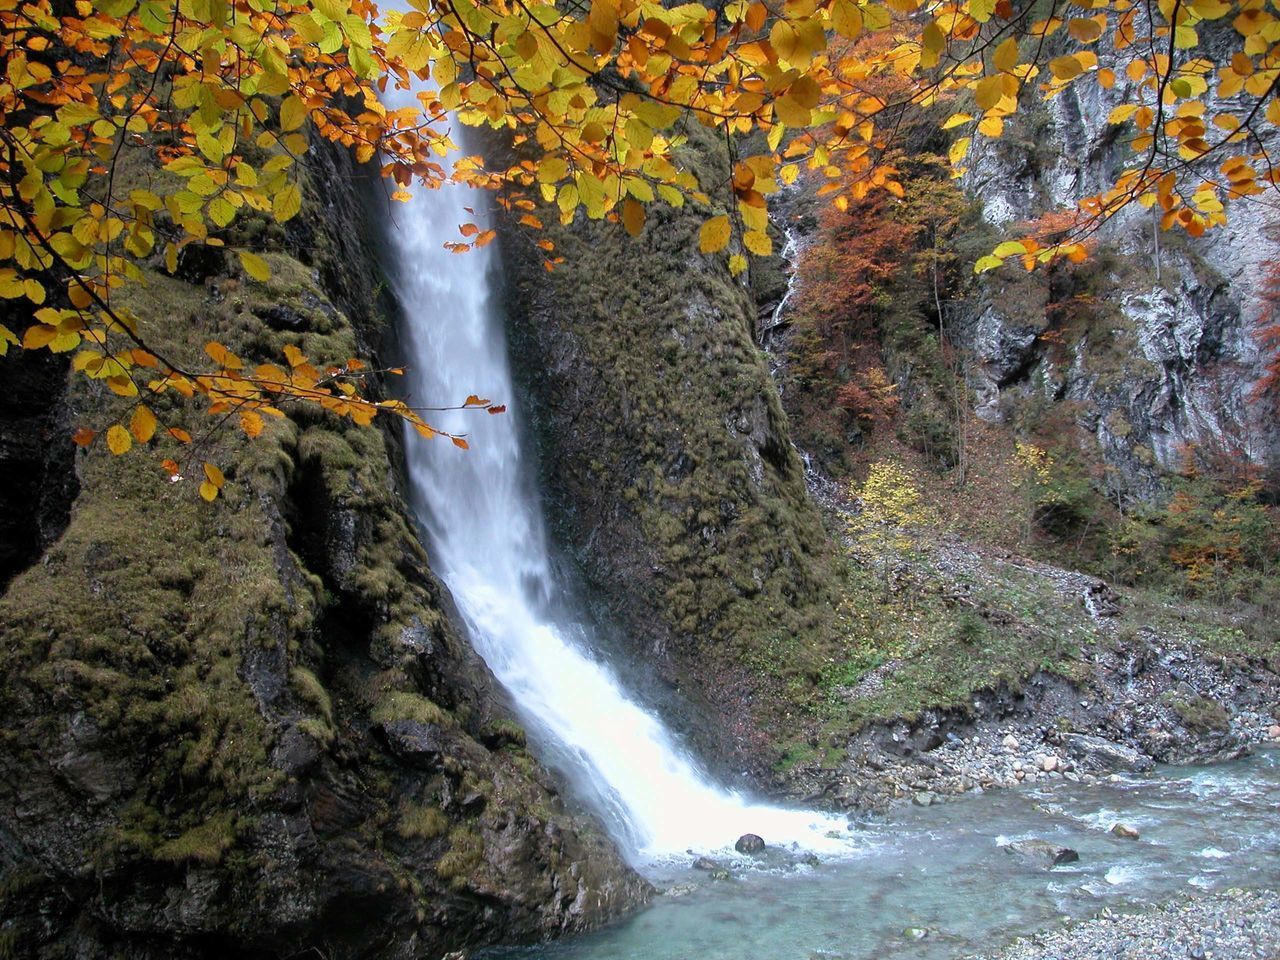 WATERFALL IN FOREST DURING AUTUMN